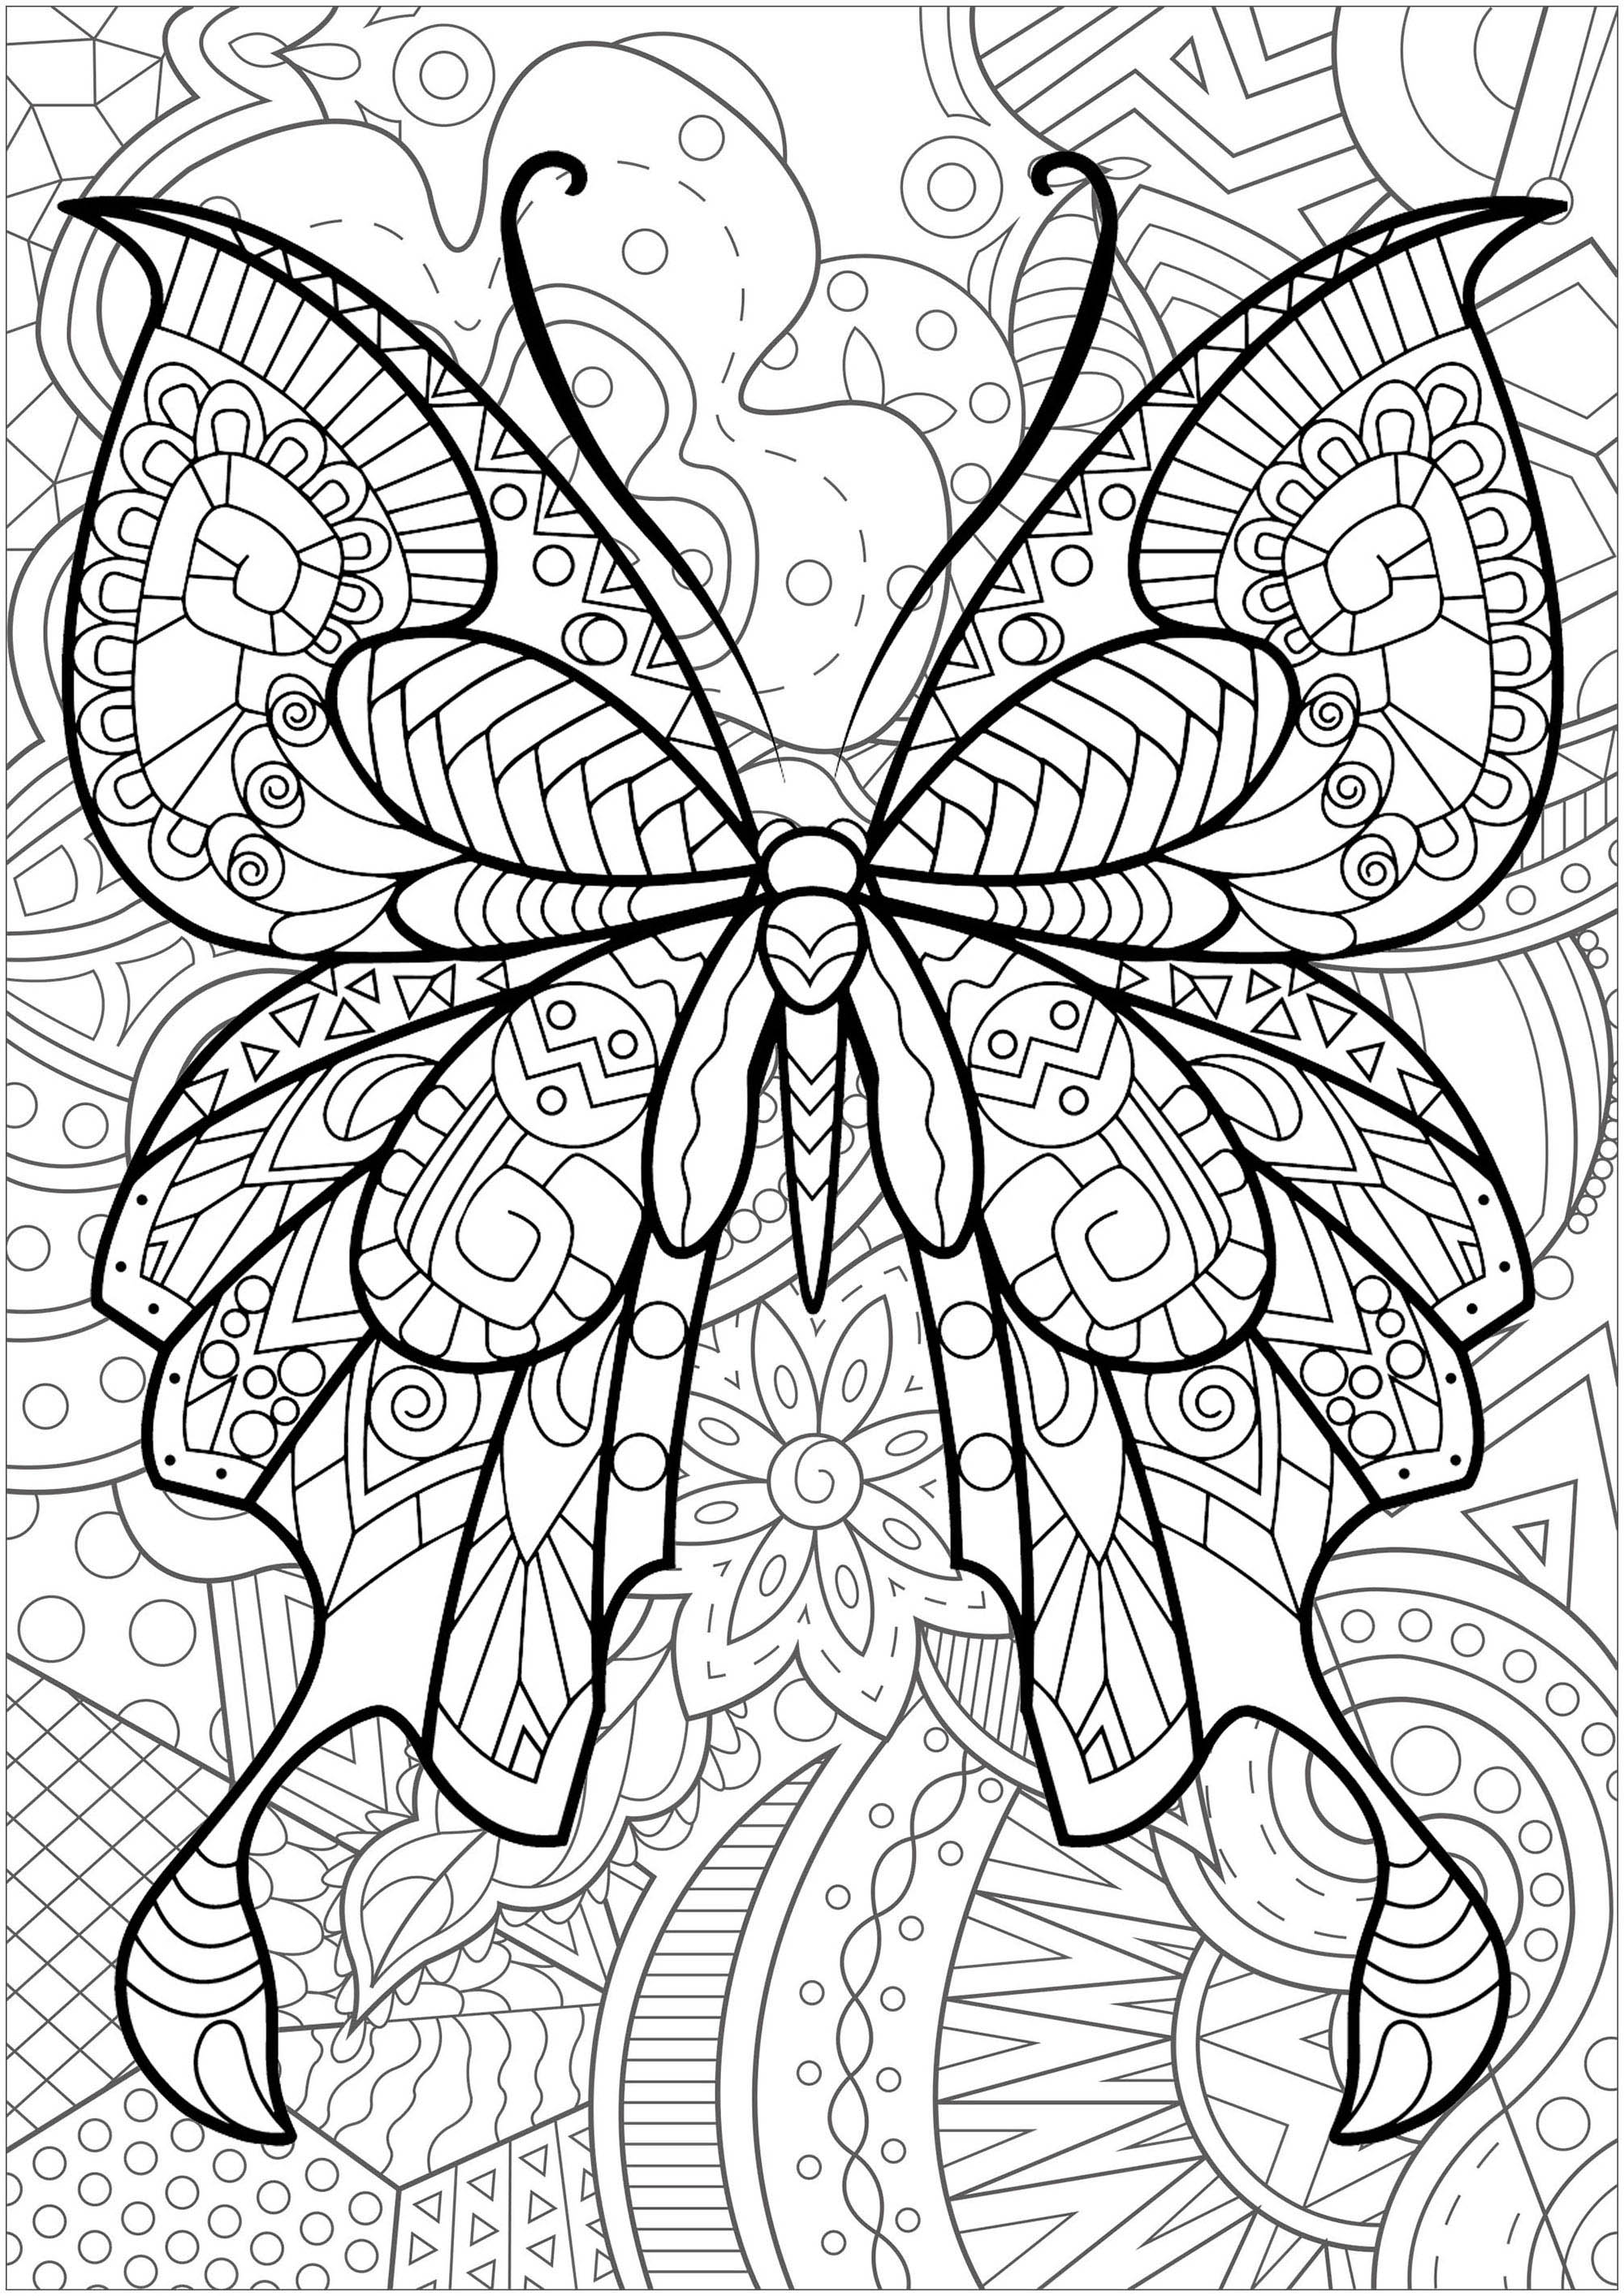 Download Butterfly with flowered background 2 - Butterflies & insects Adult Coloring Pages